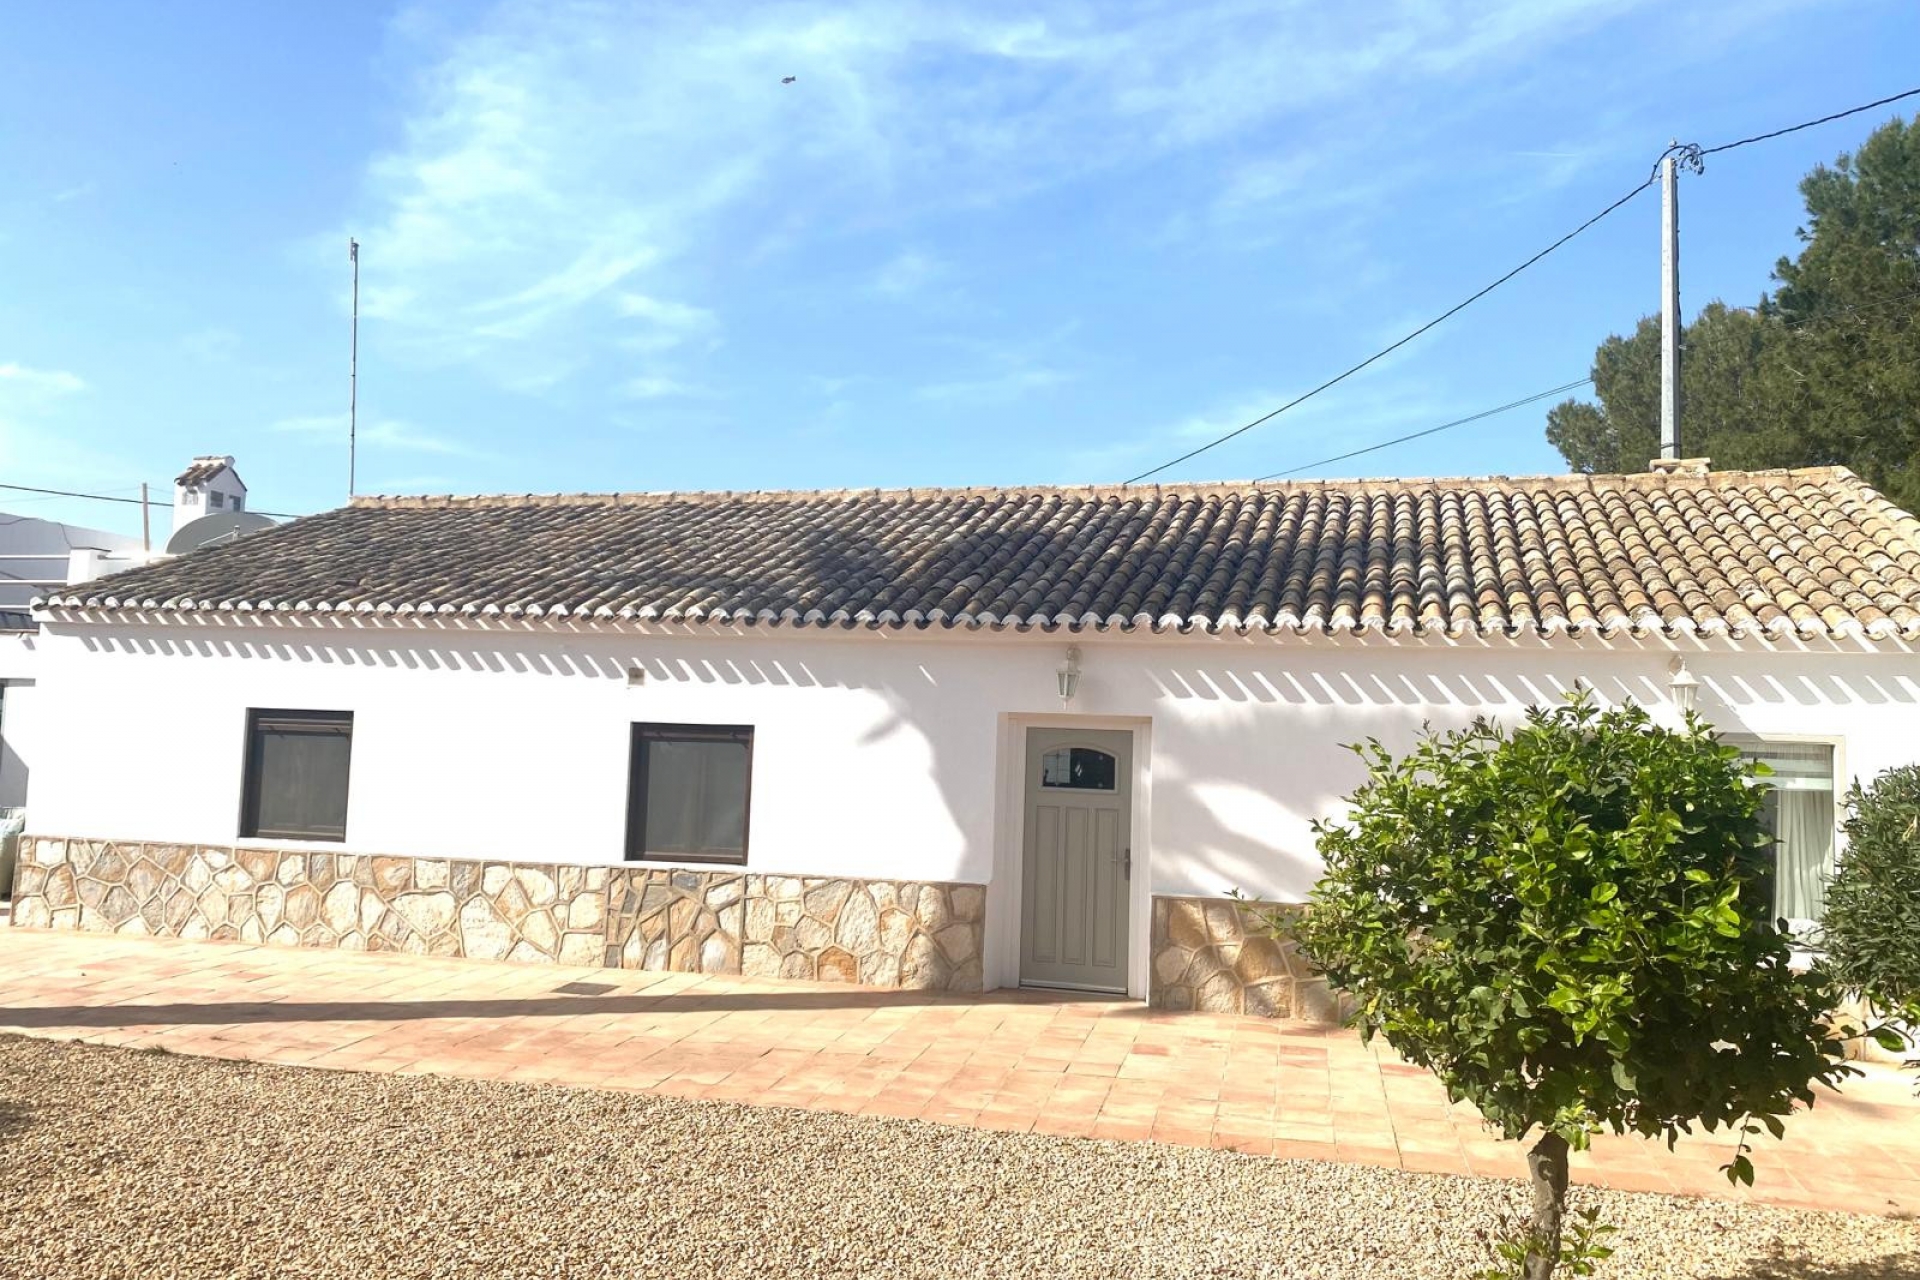 Property for sale - Villa for sale - Avileses